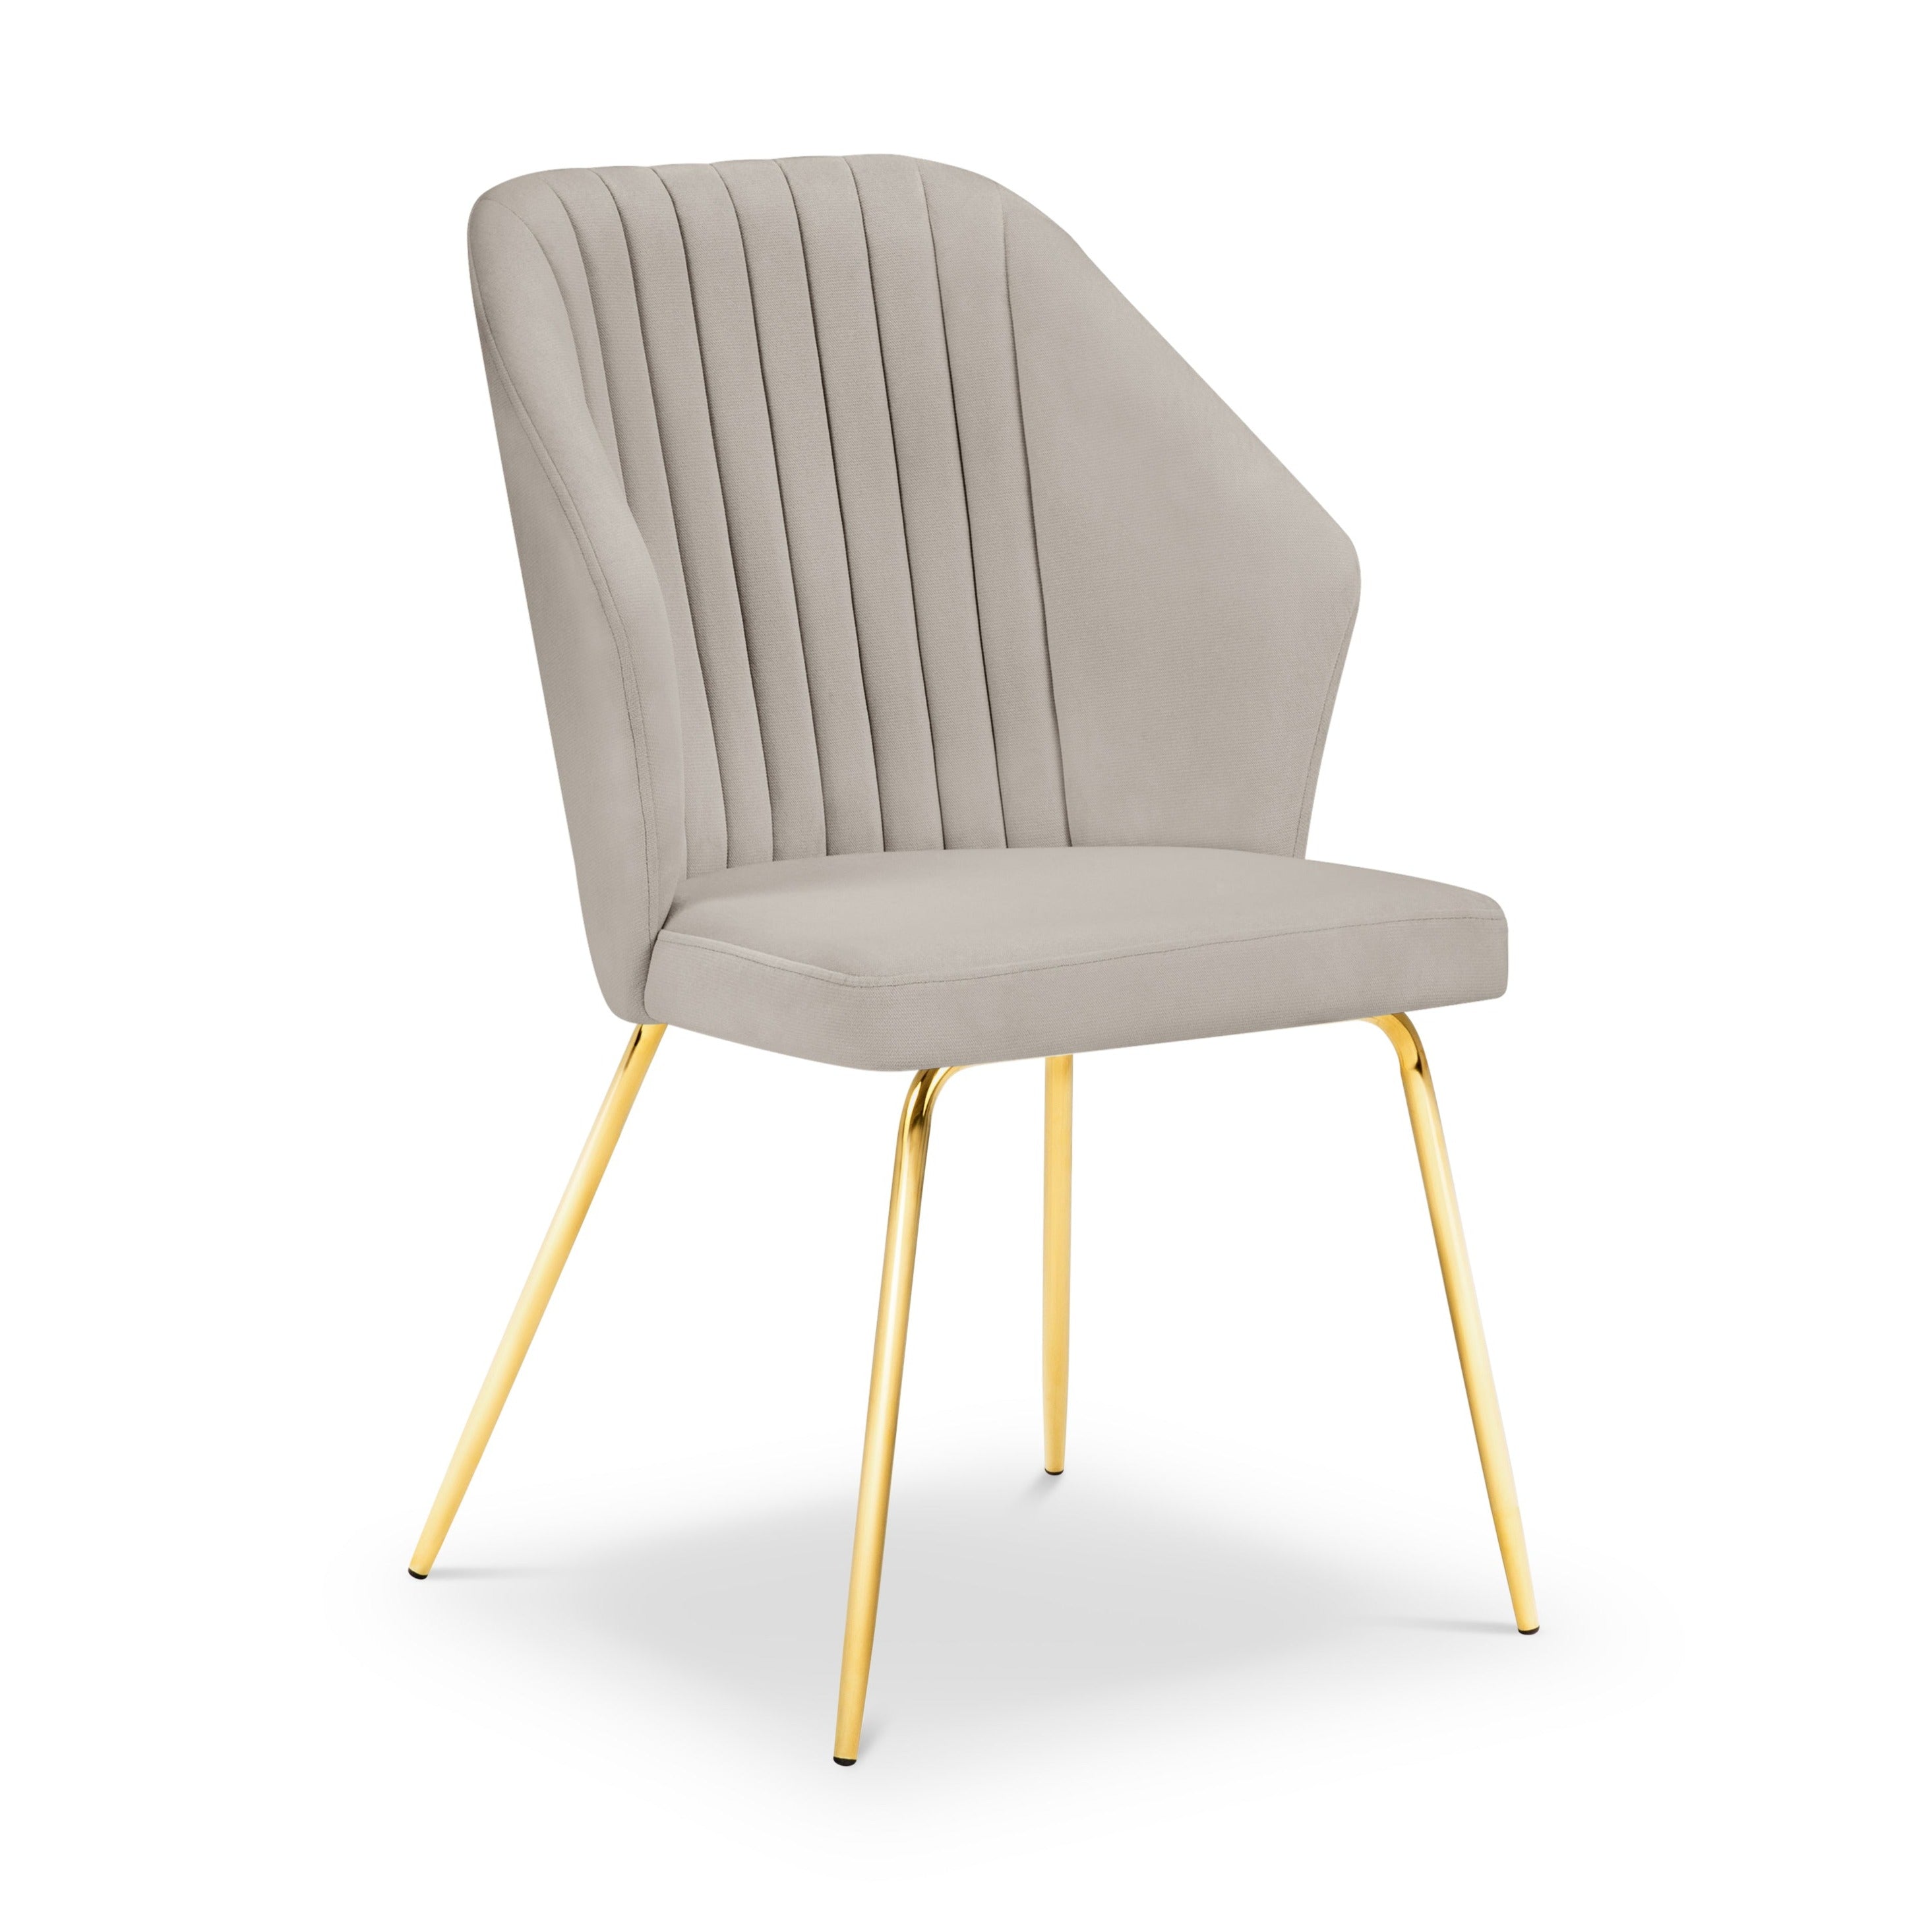 Beige chair with a golden base